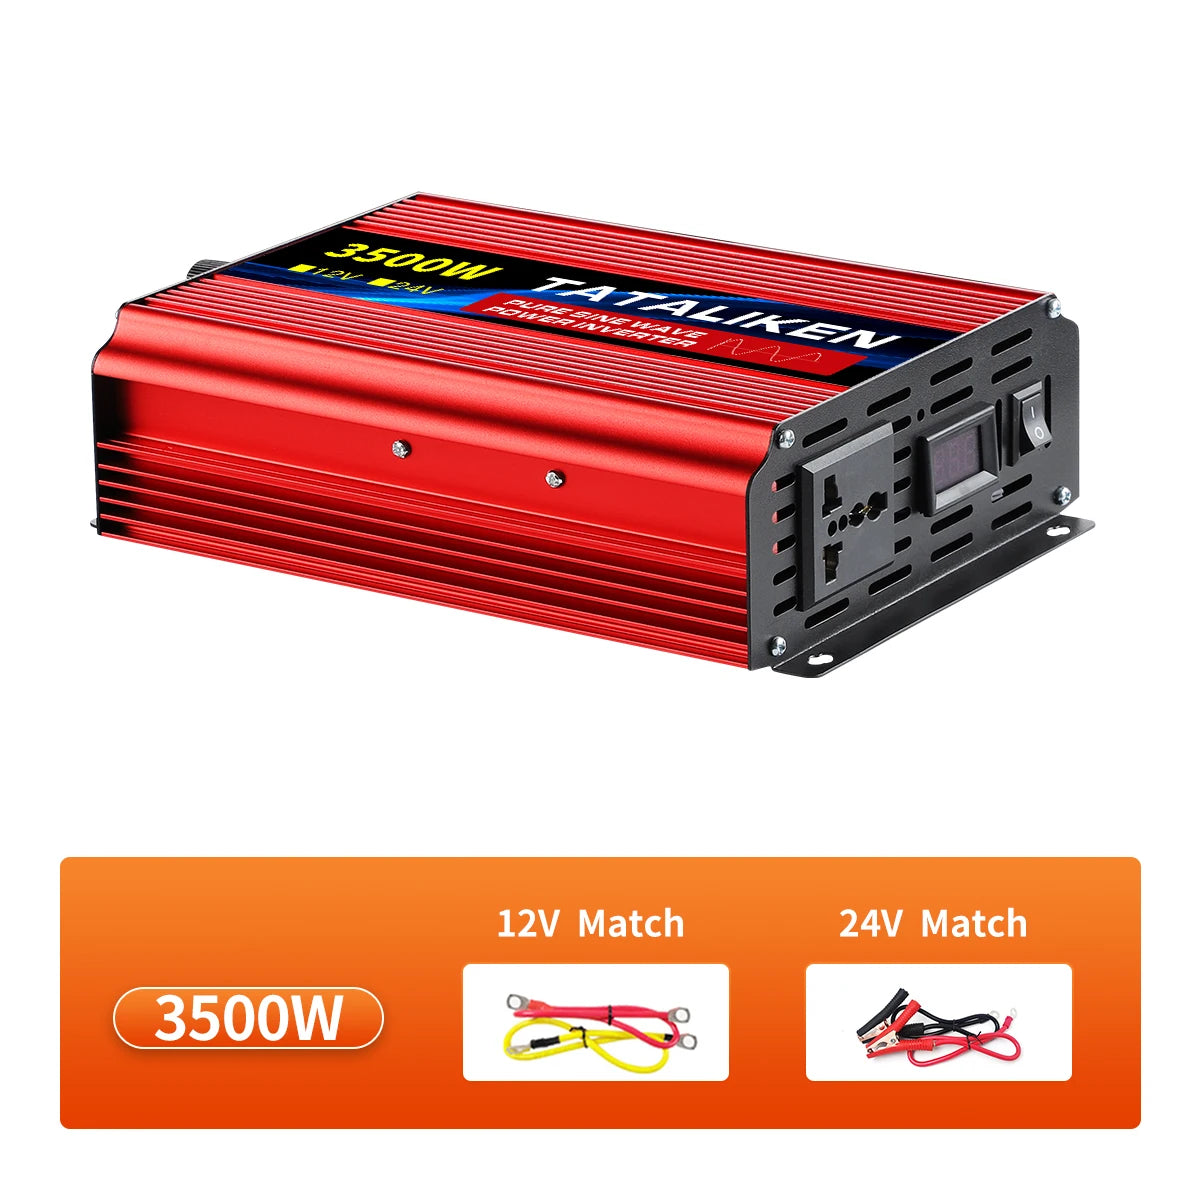 DC/AC Inverter Specifications from Tataliken, Mainland China.